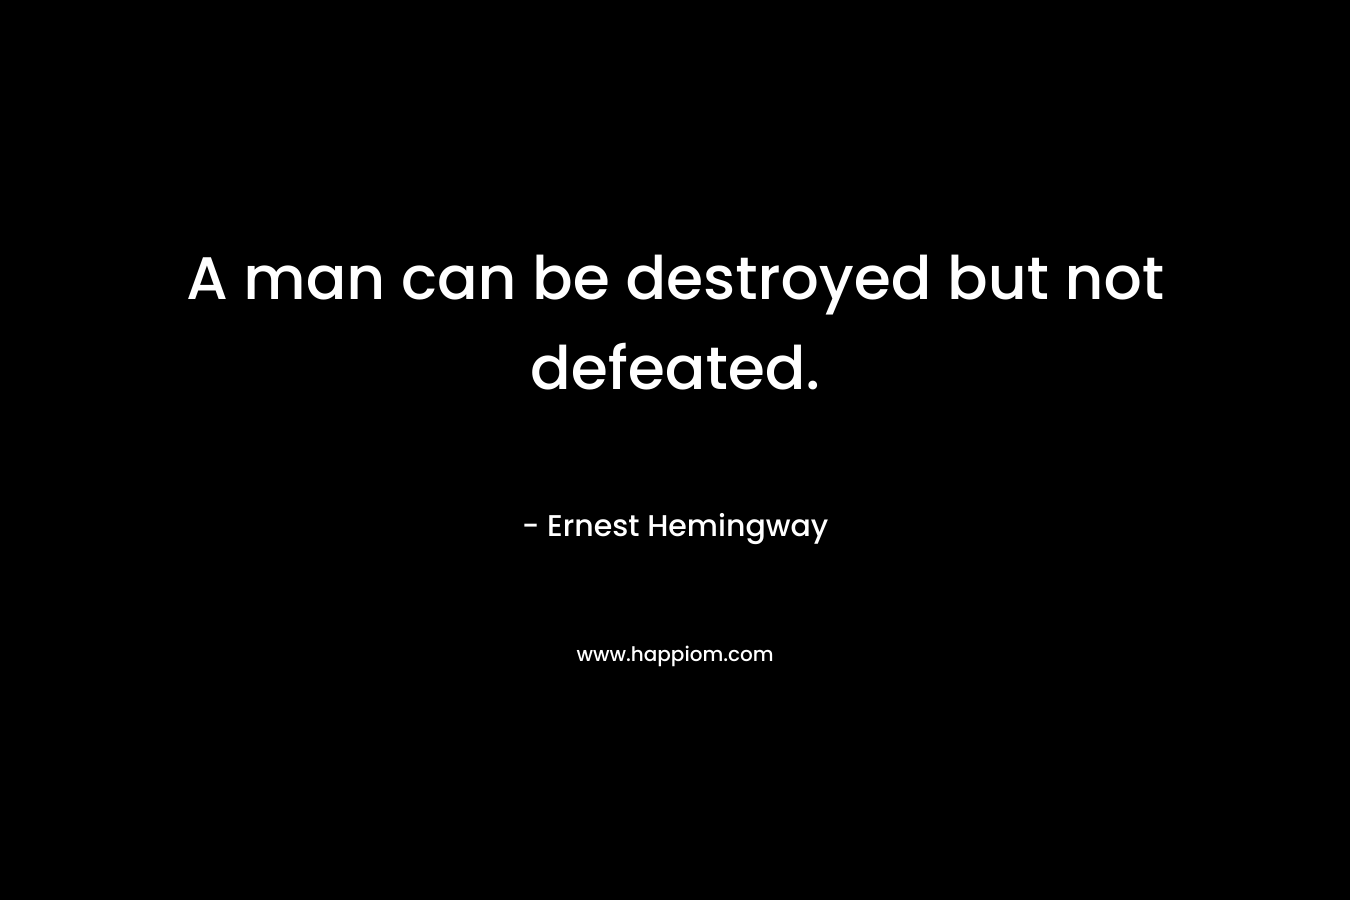 A man can be destroyed but not defeated. – Ernest Hemingway